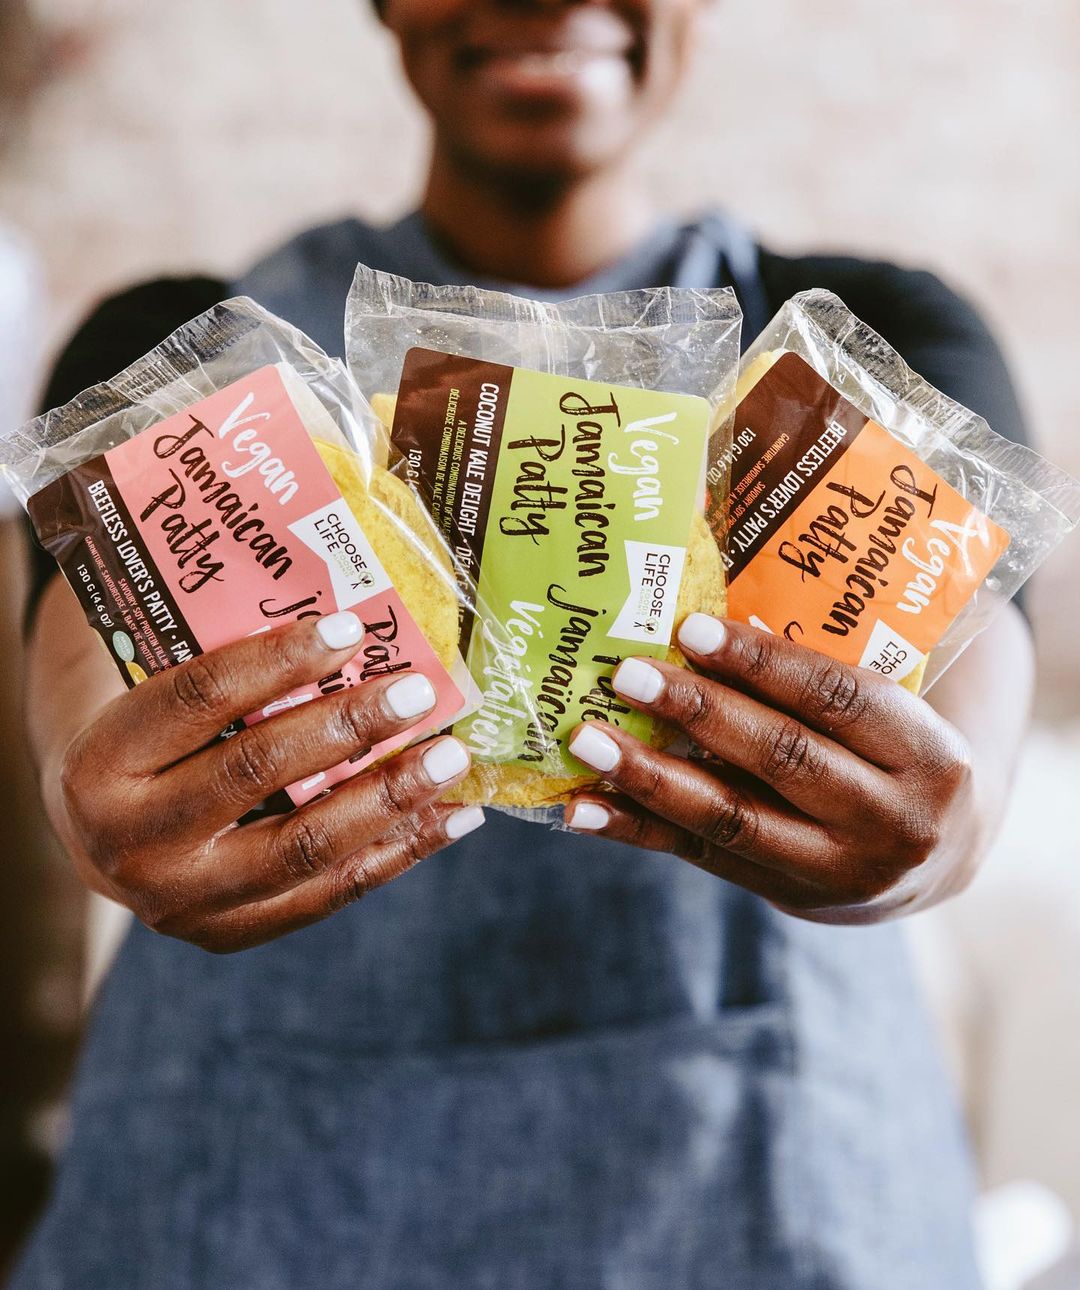 17 Vegan Black-Owned Food Brands to Support During Black History Month